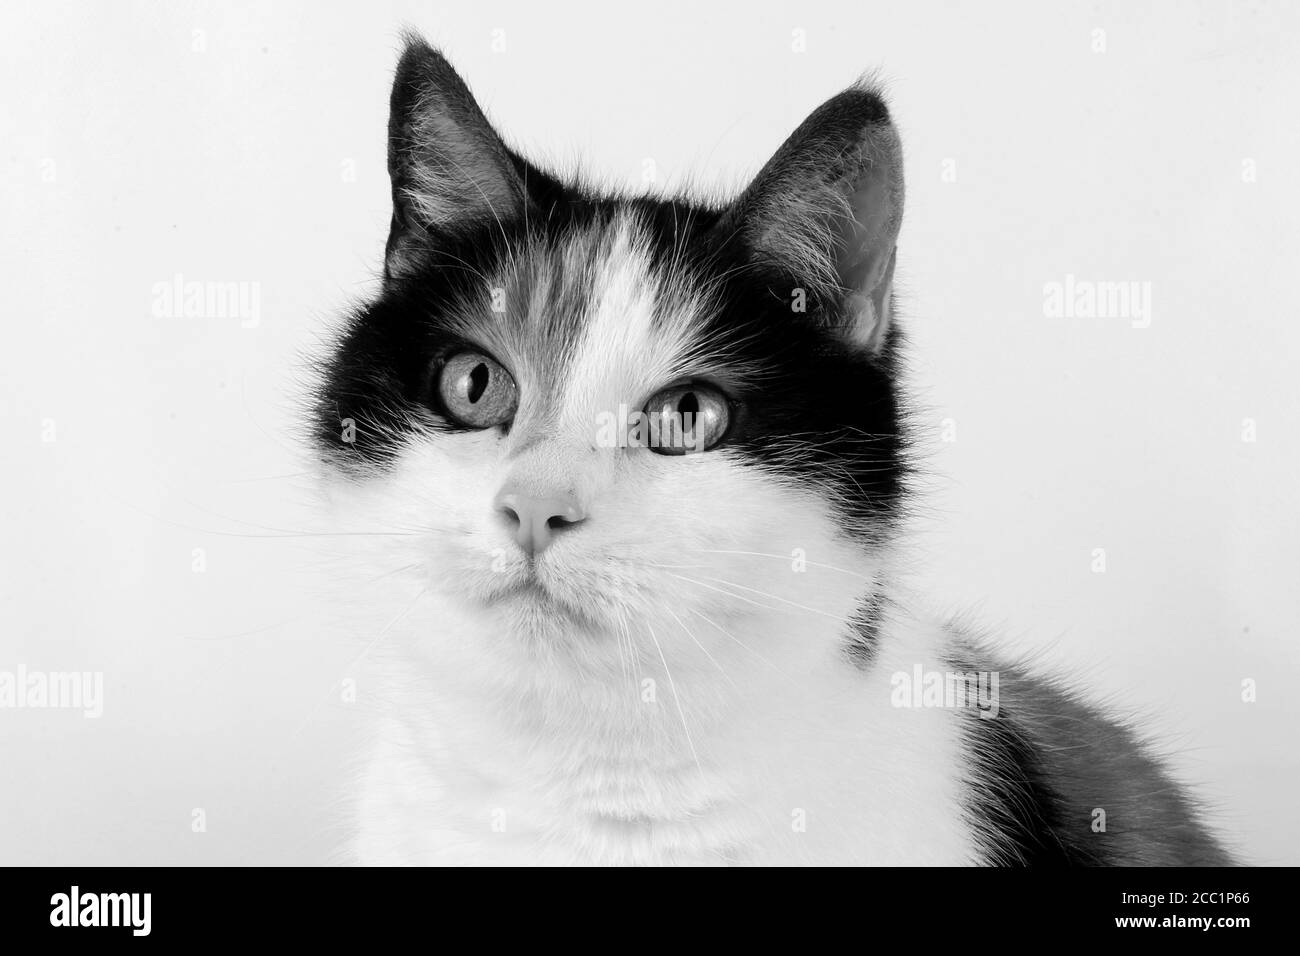 Isolated grayscale closeup shot of a calico cat's face Stock Photo